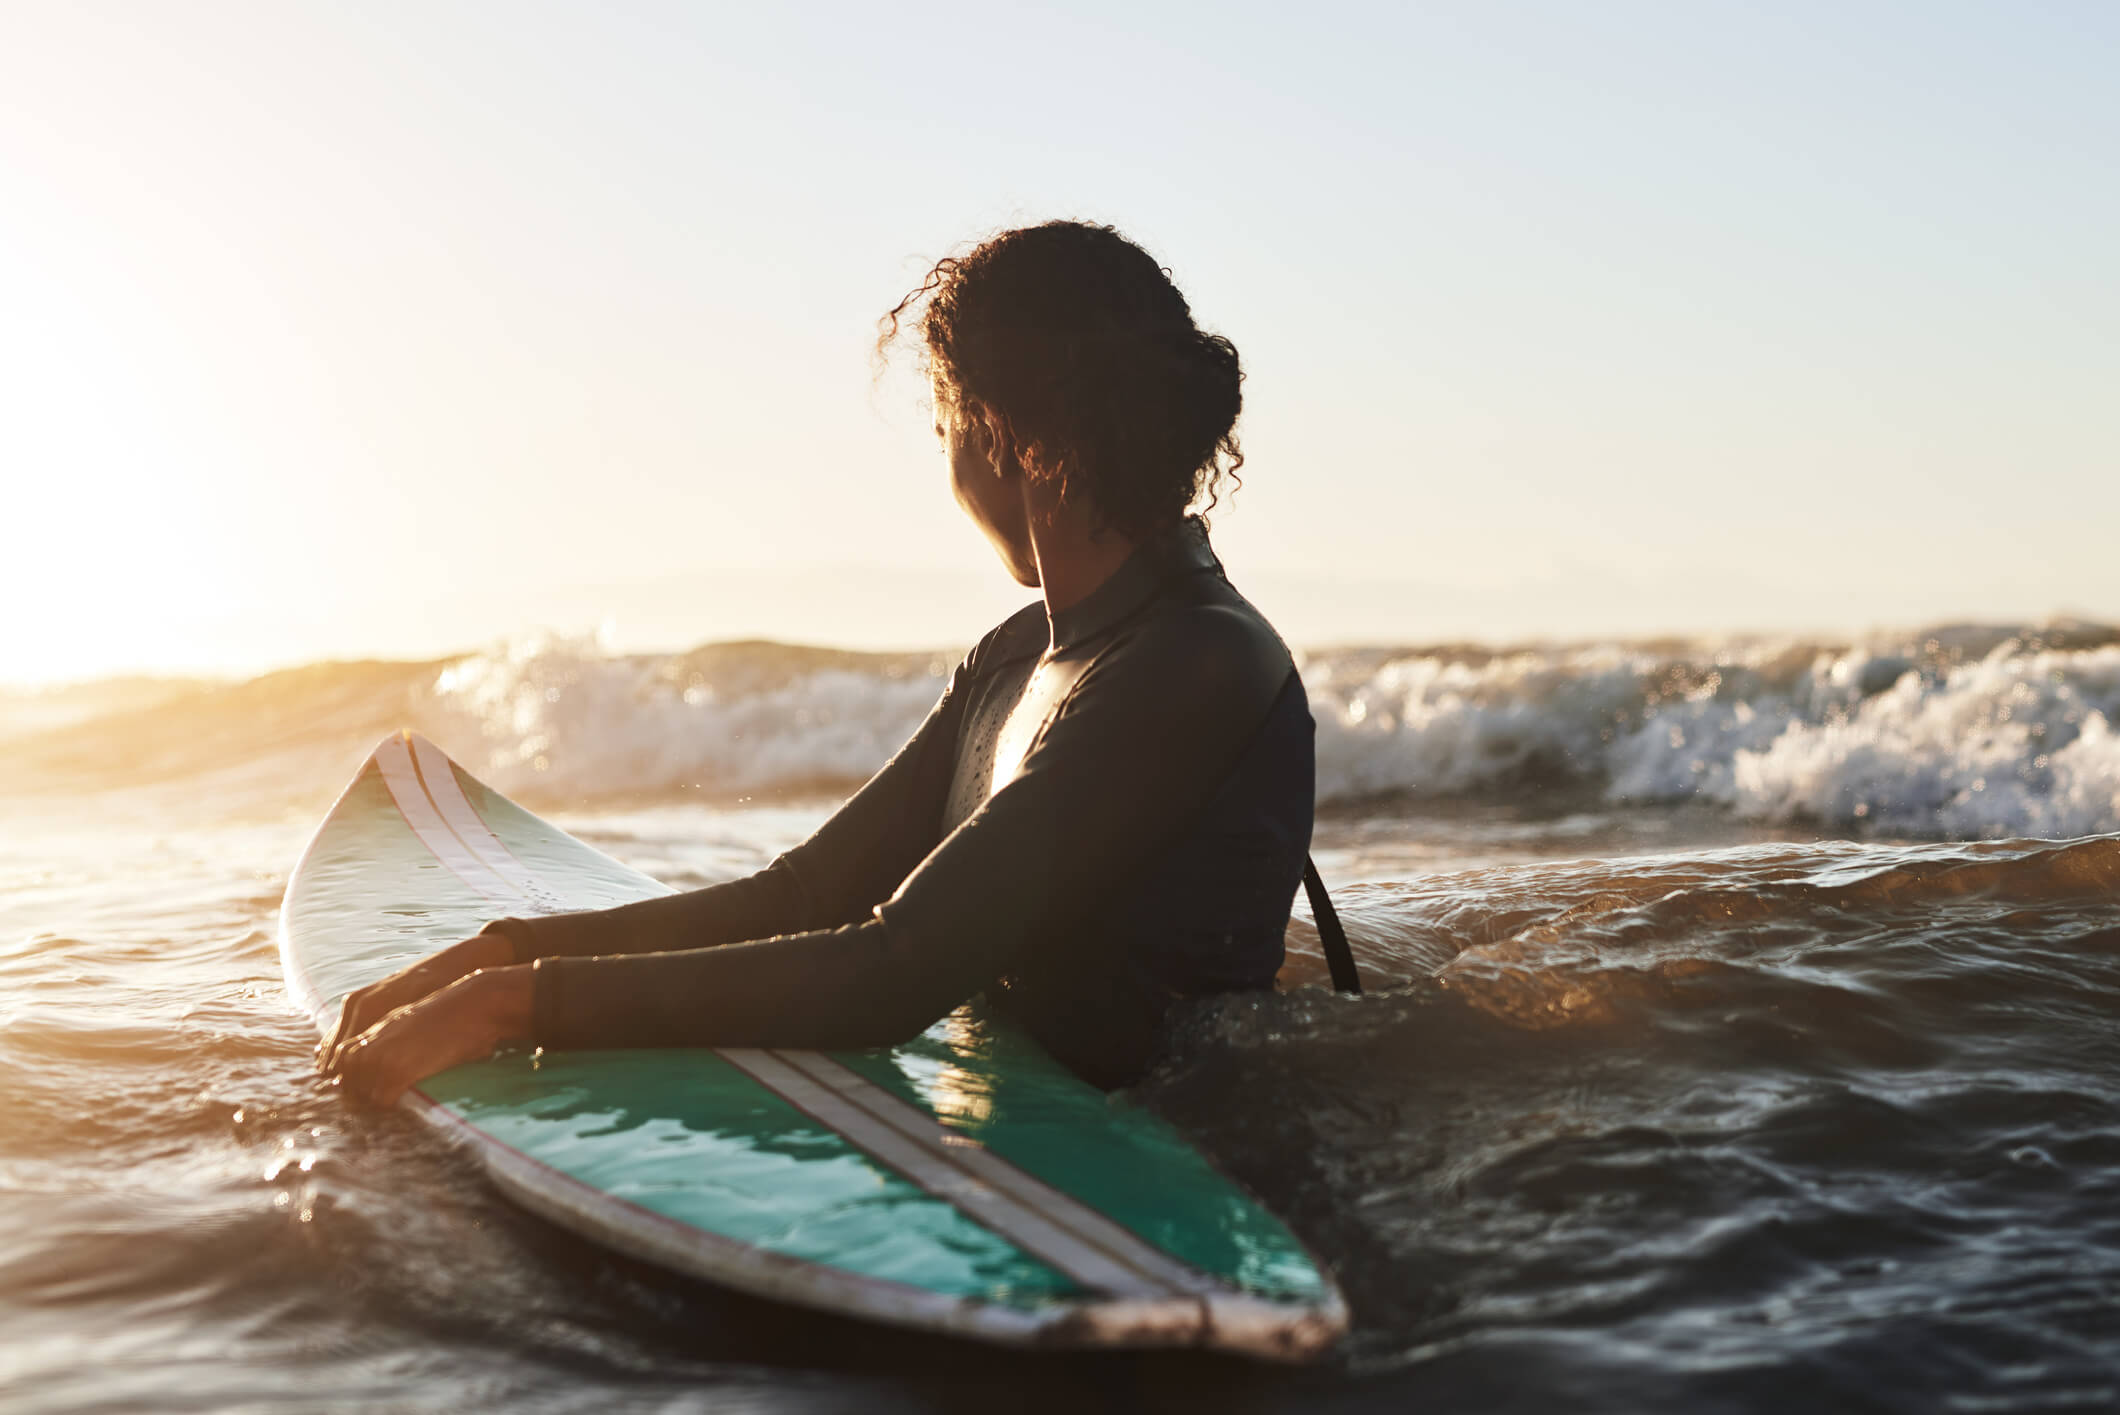 health risk assessments blog woman surfing photo cority